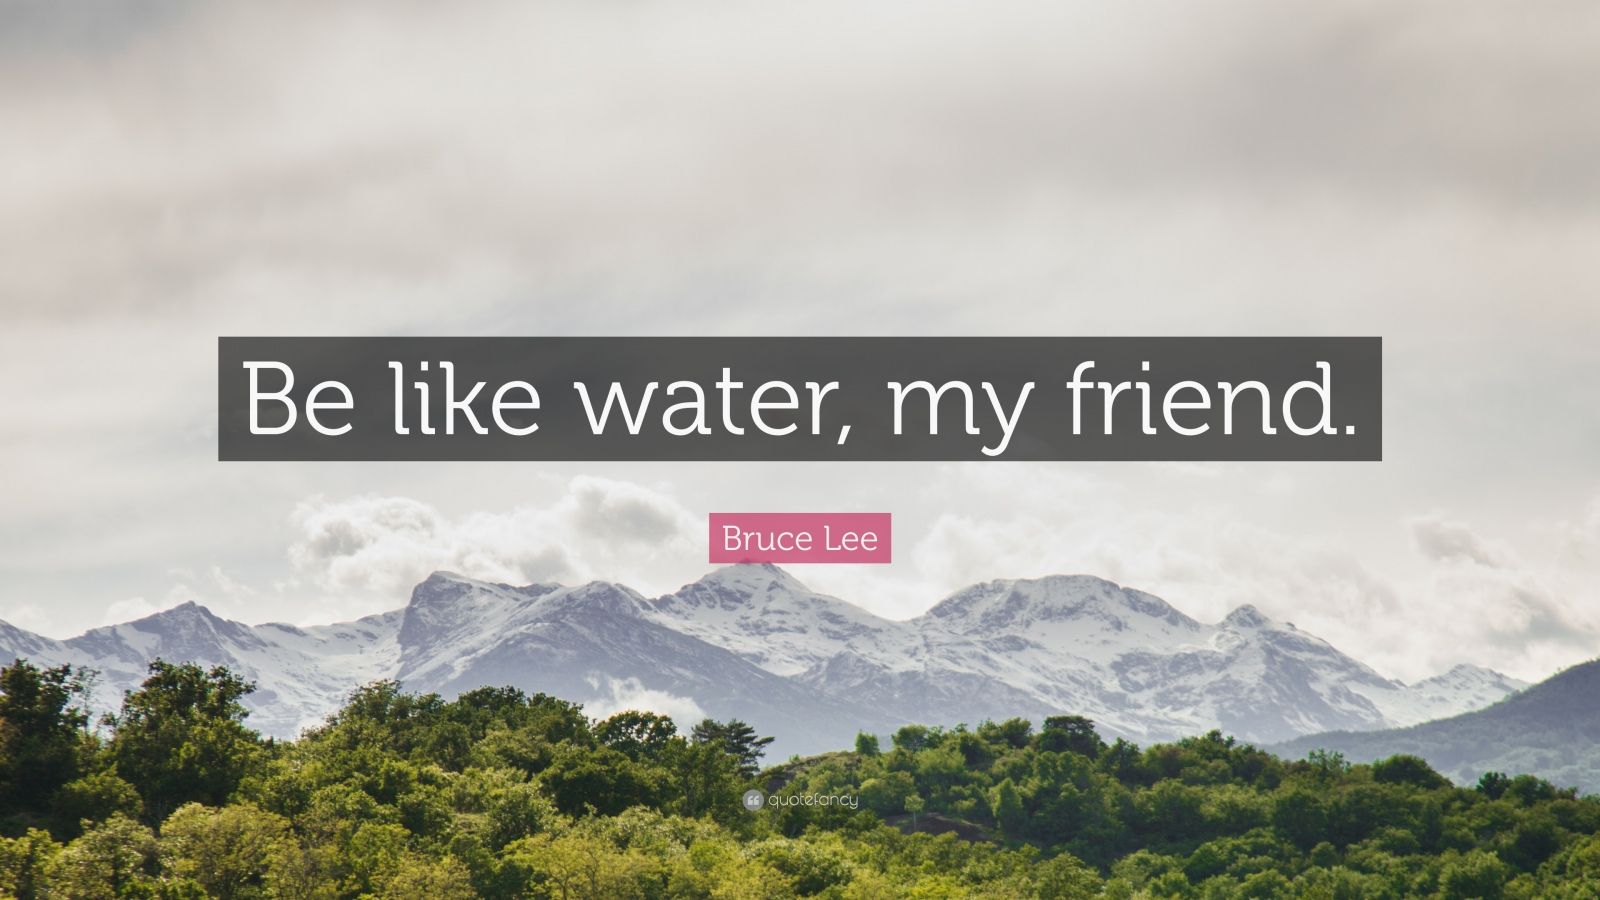 Bruce Lee Quote: "Be like water, my friend." (12 ...